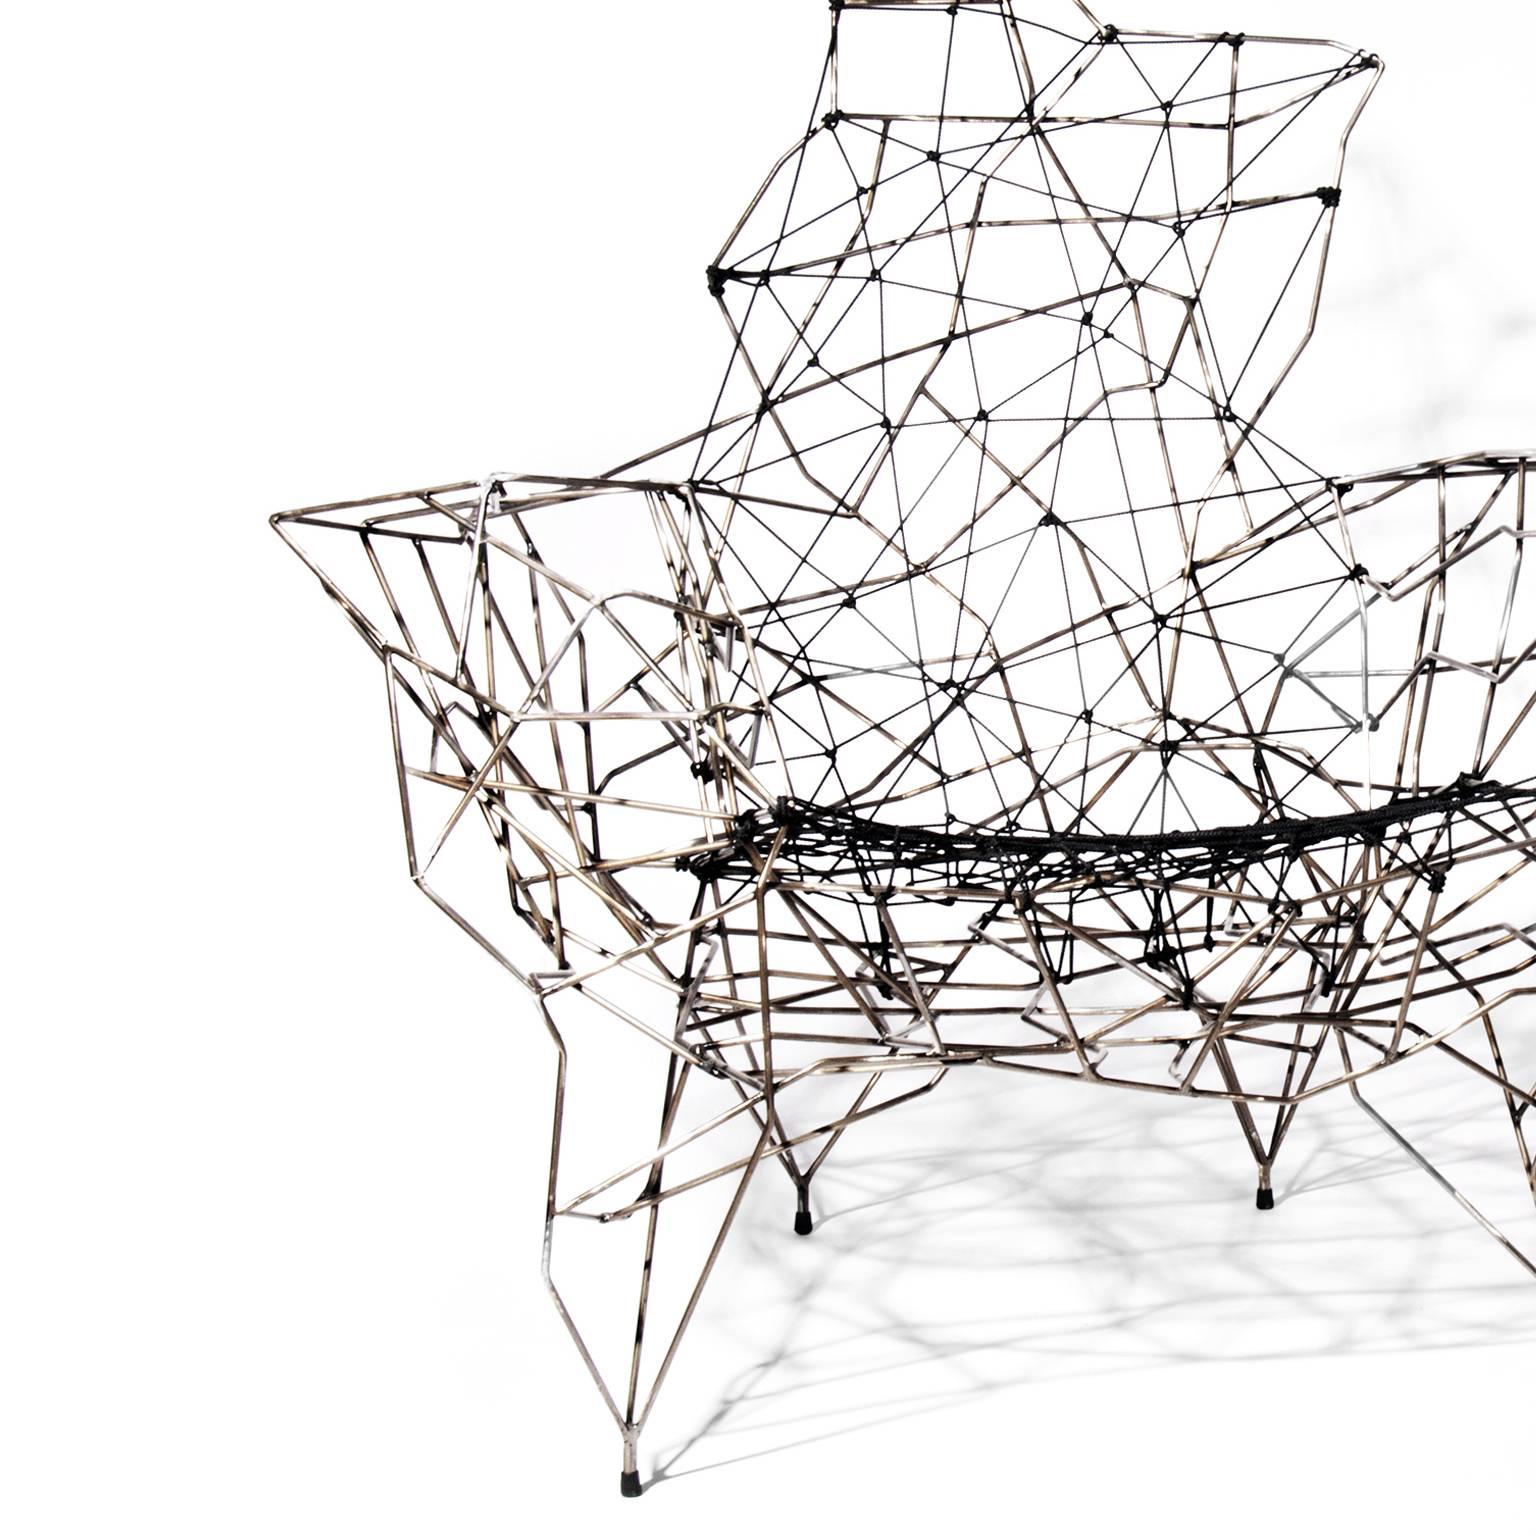 Atelier Demiurge Editions Stork Nest Chair shown in highly stylized steel and twine wire. Handmade piece varies slightly.
 
Atelier Demiurge Editions pieces are made to order. Please contact the gallery for a quote.

Dimensions
44 W X 34 D X 41